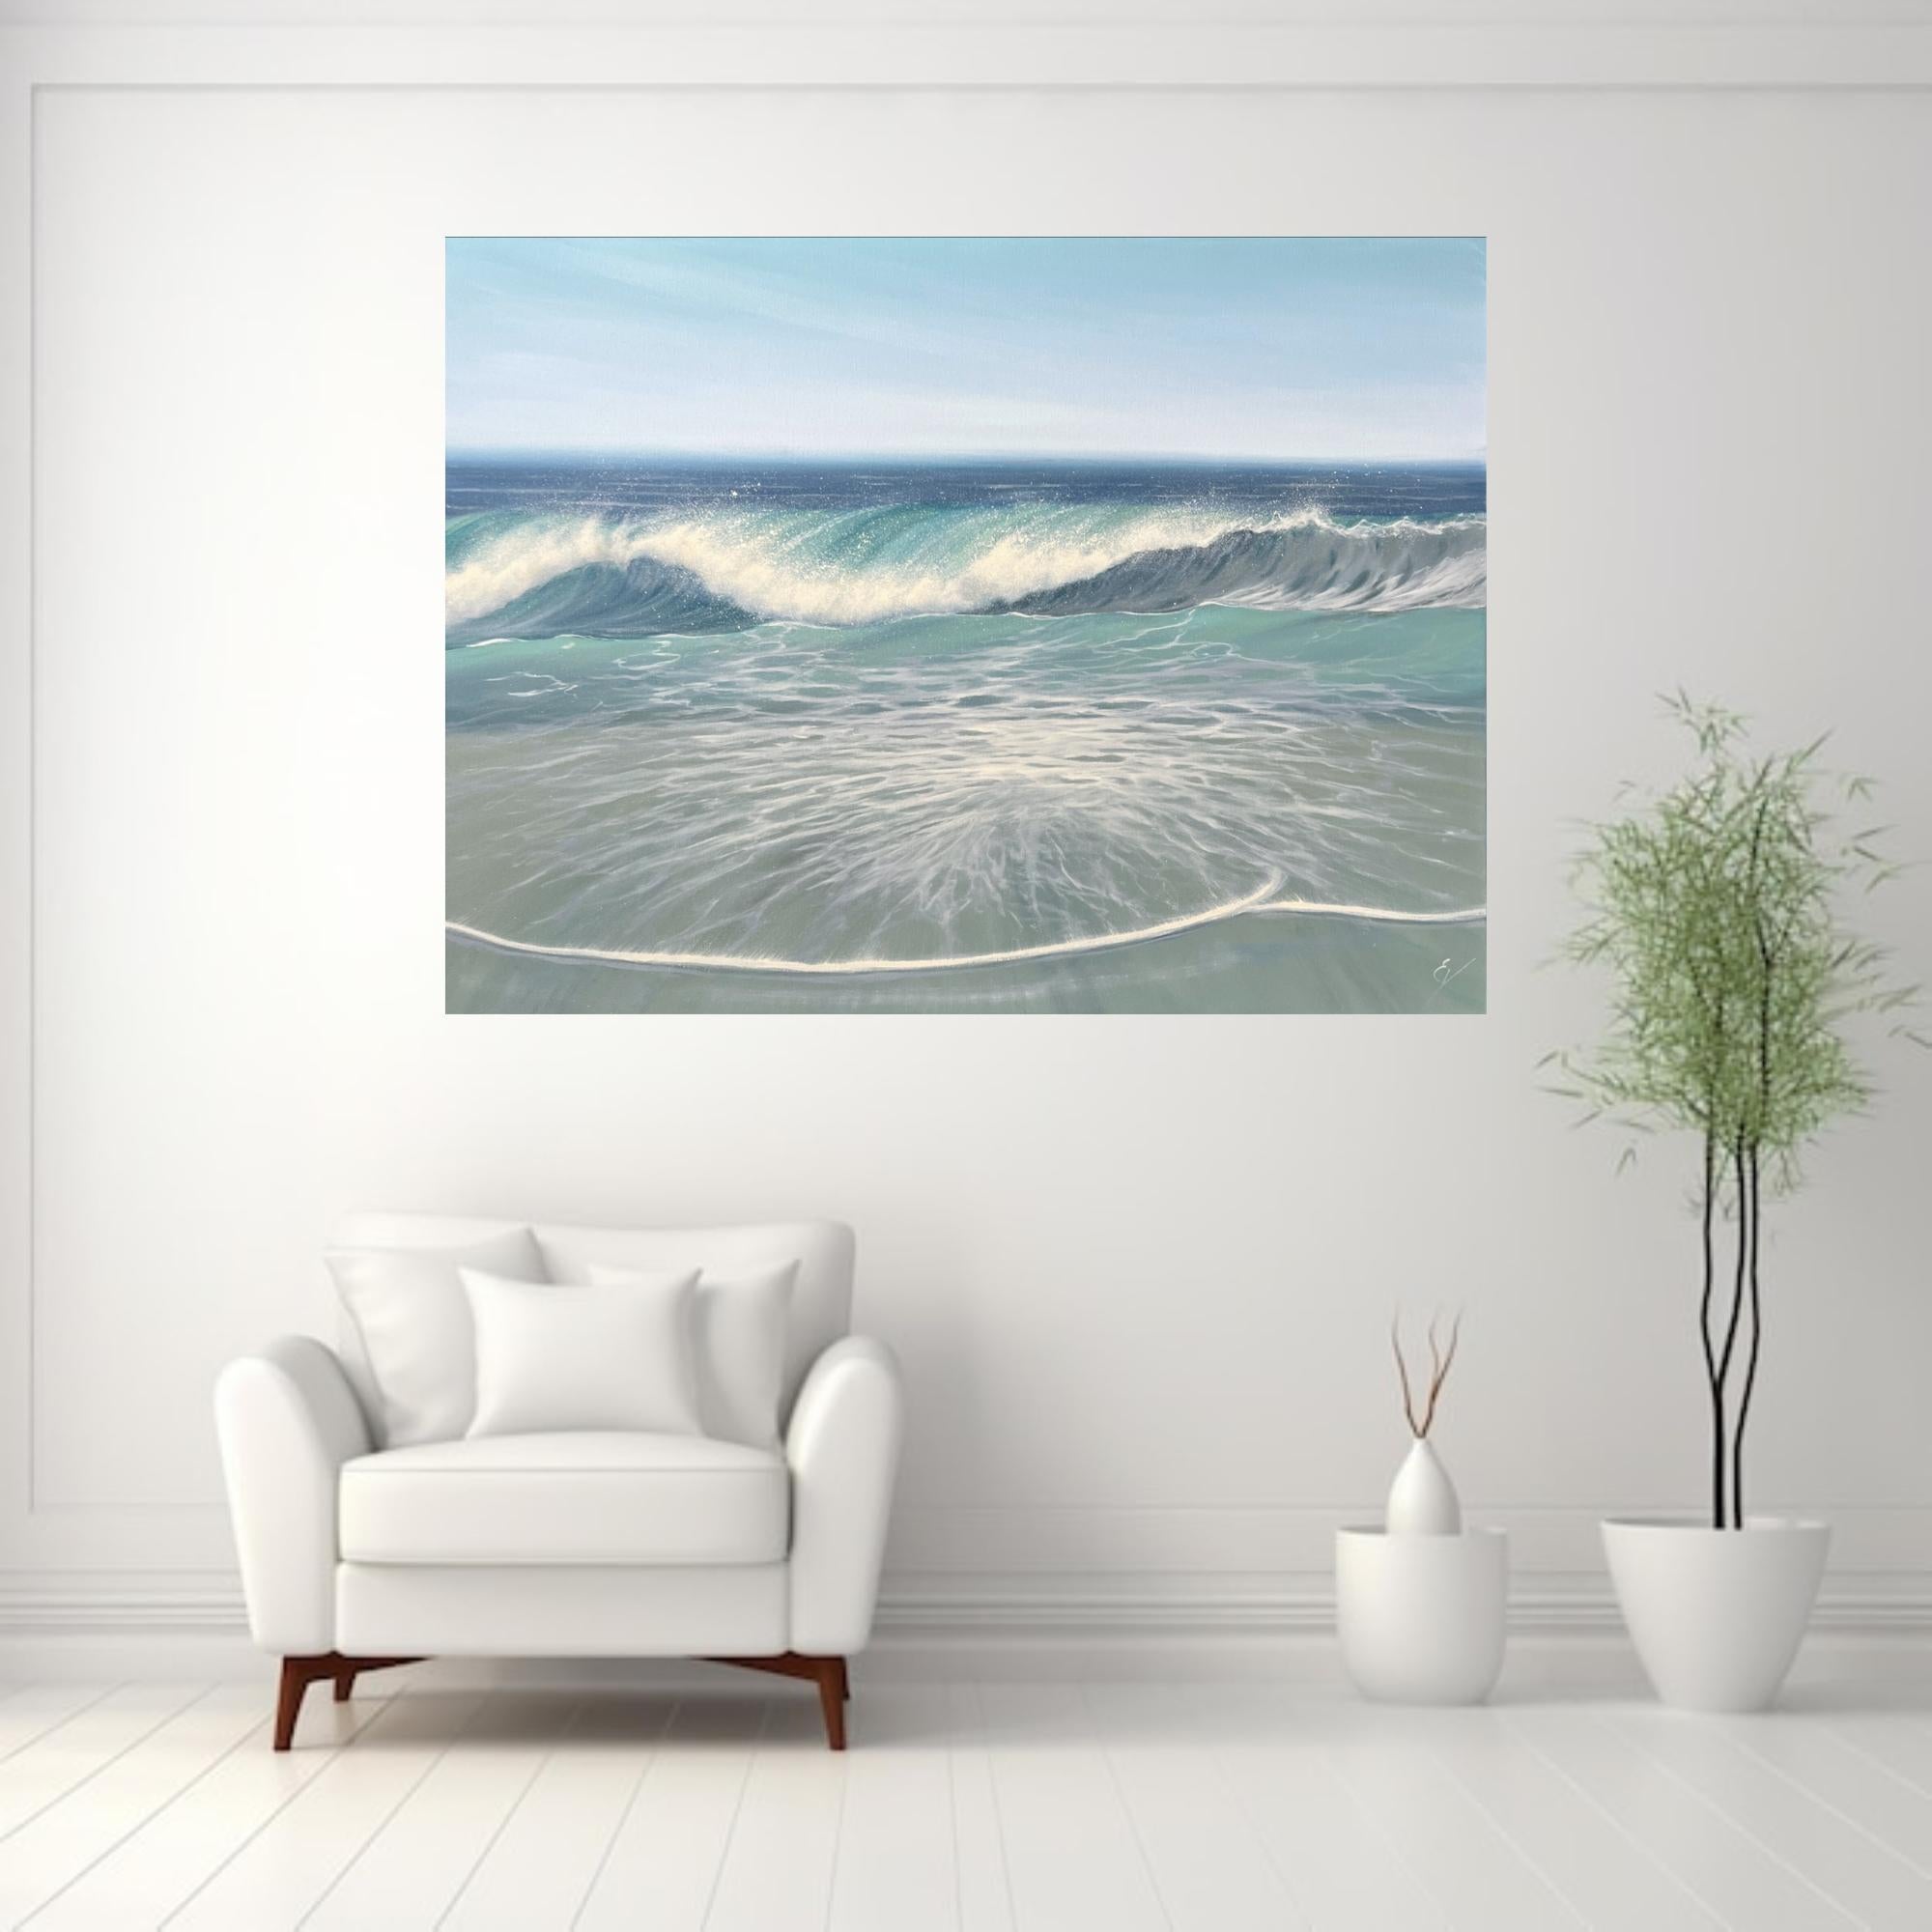 Exhale-ORIGINAL REALISM SEASCAPE Ocean oil painting-contemporary artwork - Realist Painting by Eva Volf